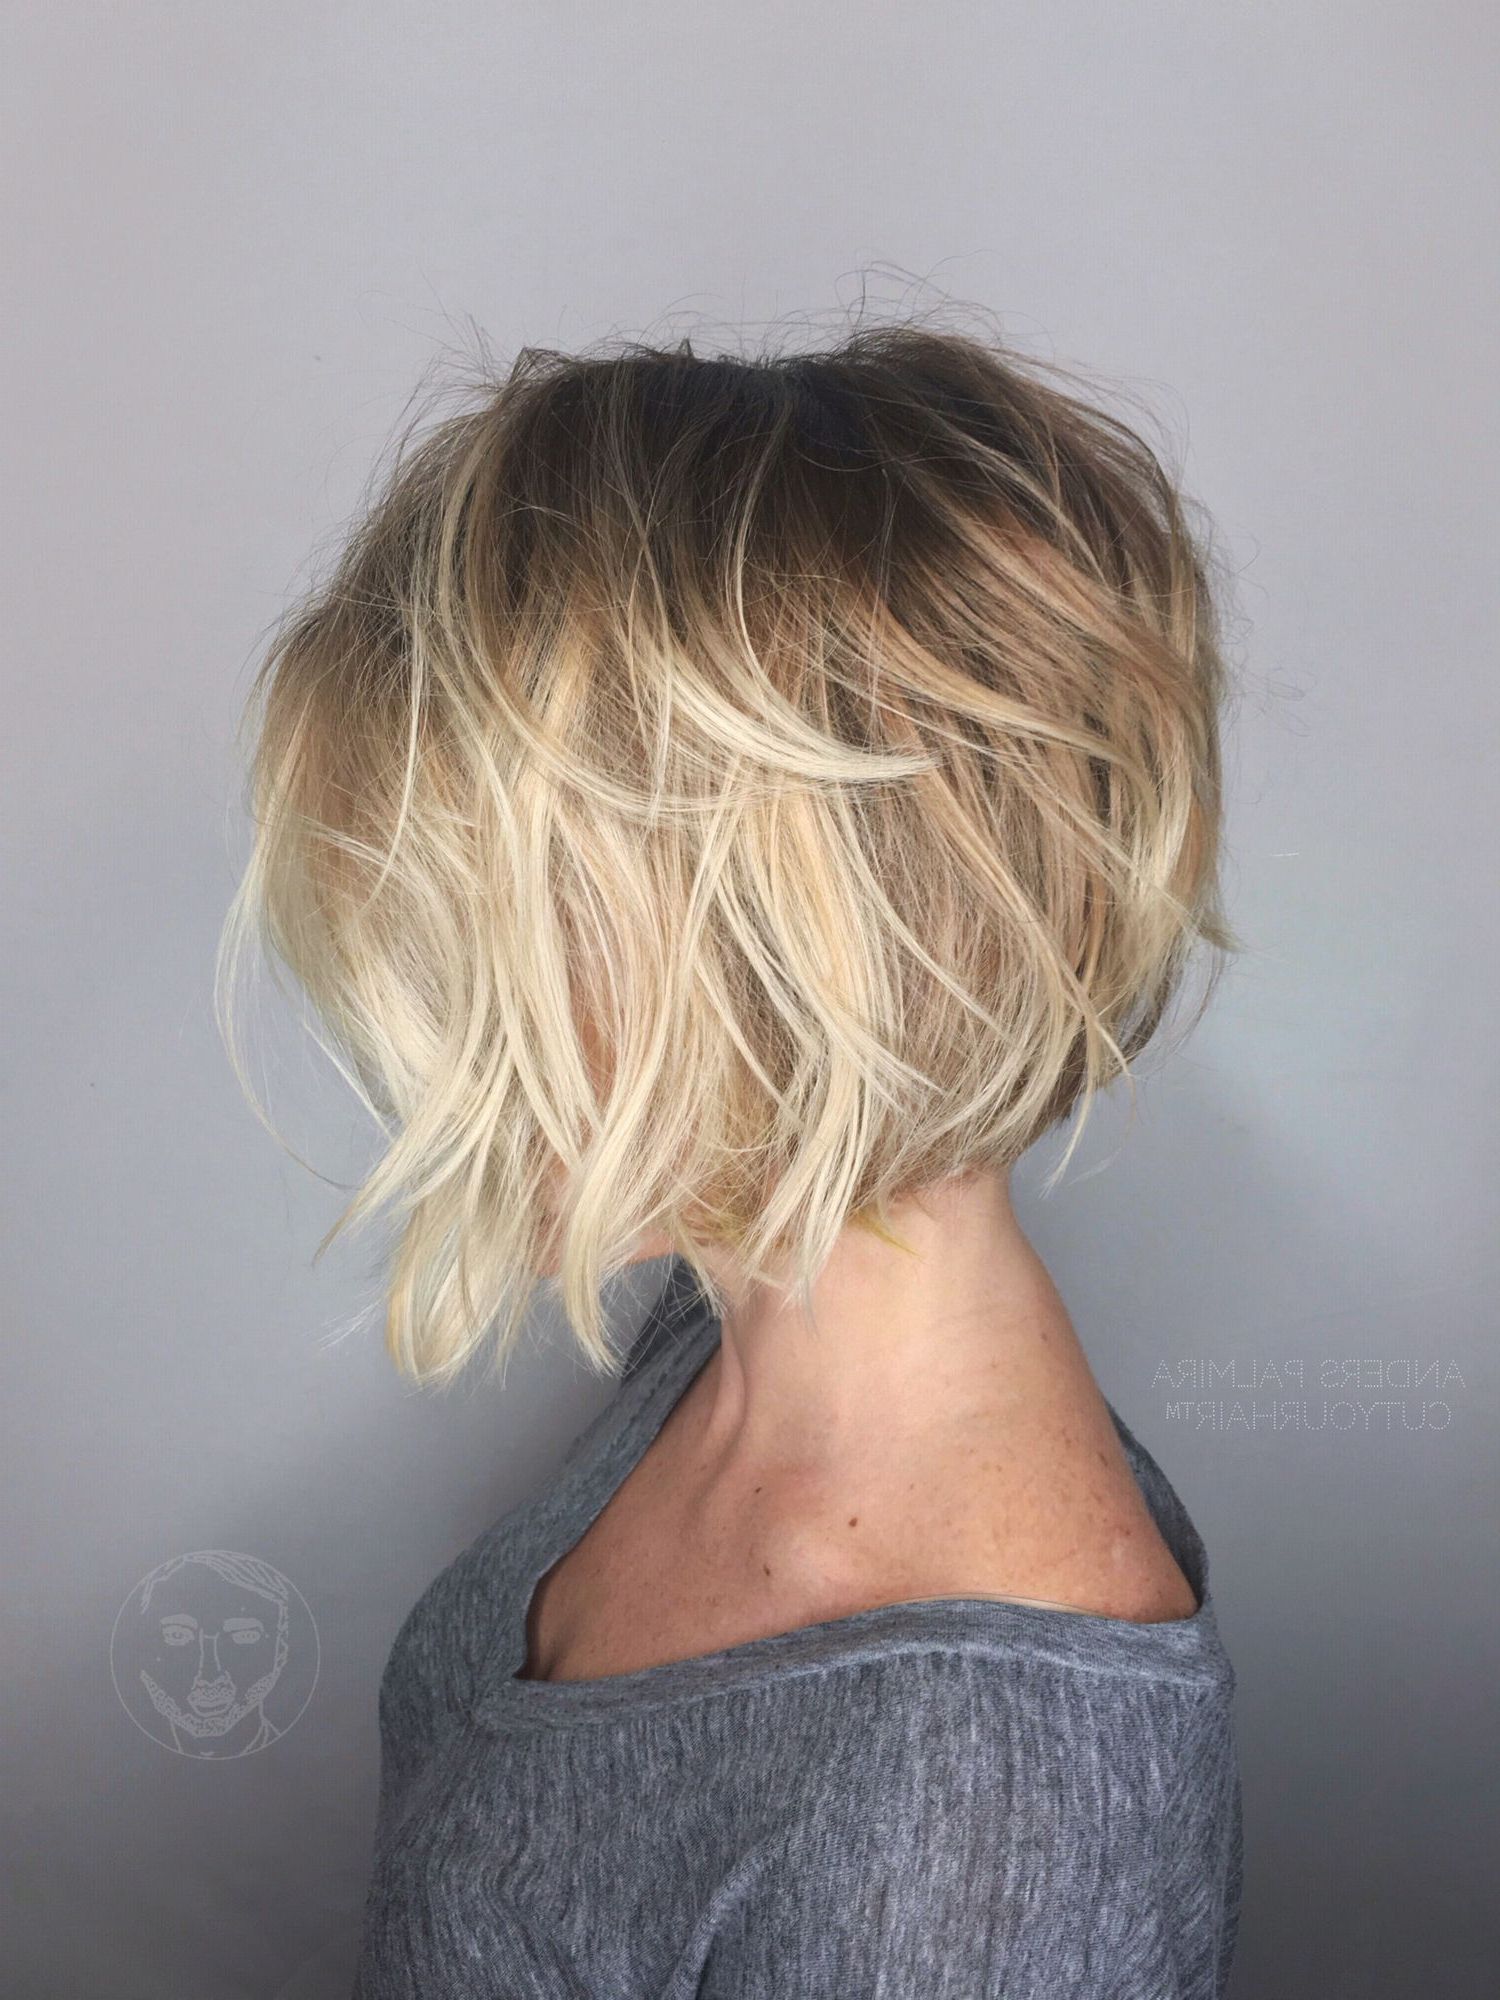 Aveda Wavy Long Blonde Bob Short Hair Beach Wave Medium Ideas Lob With Regard To Edgy Brunette Bob Hairstyles With Glossy Waves (View 6 of 20)